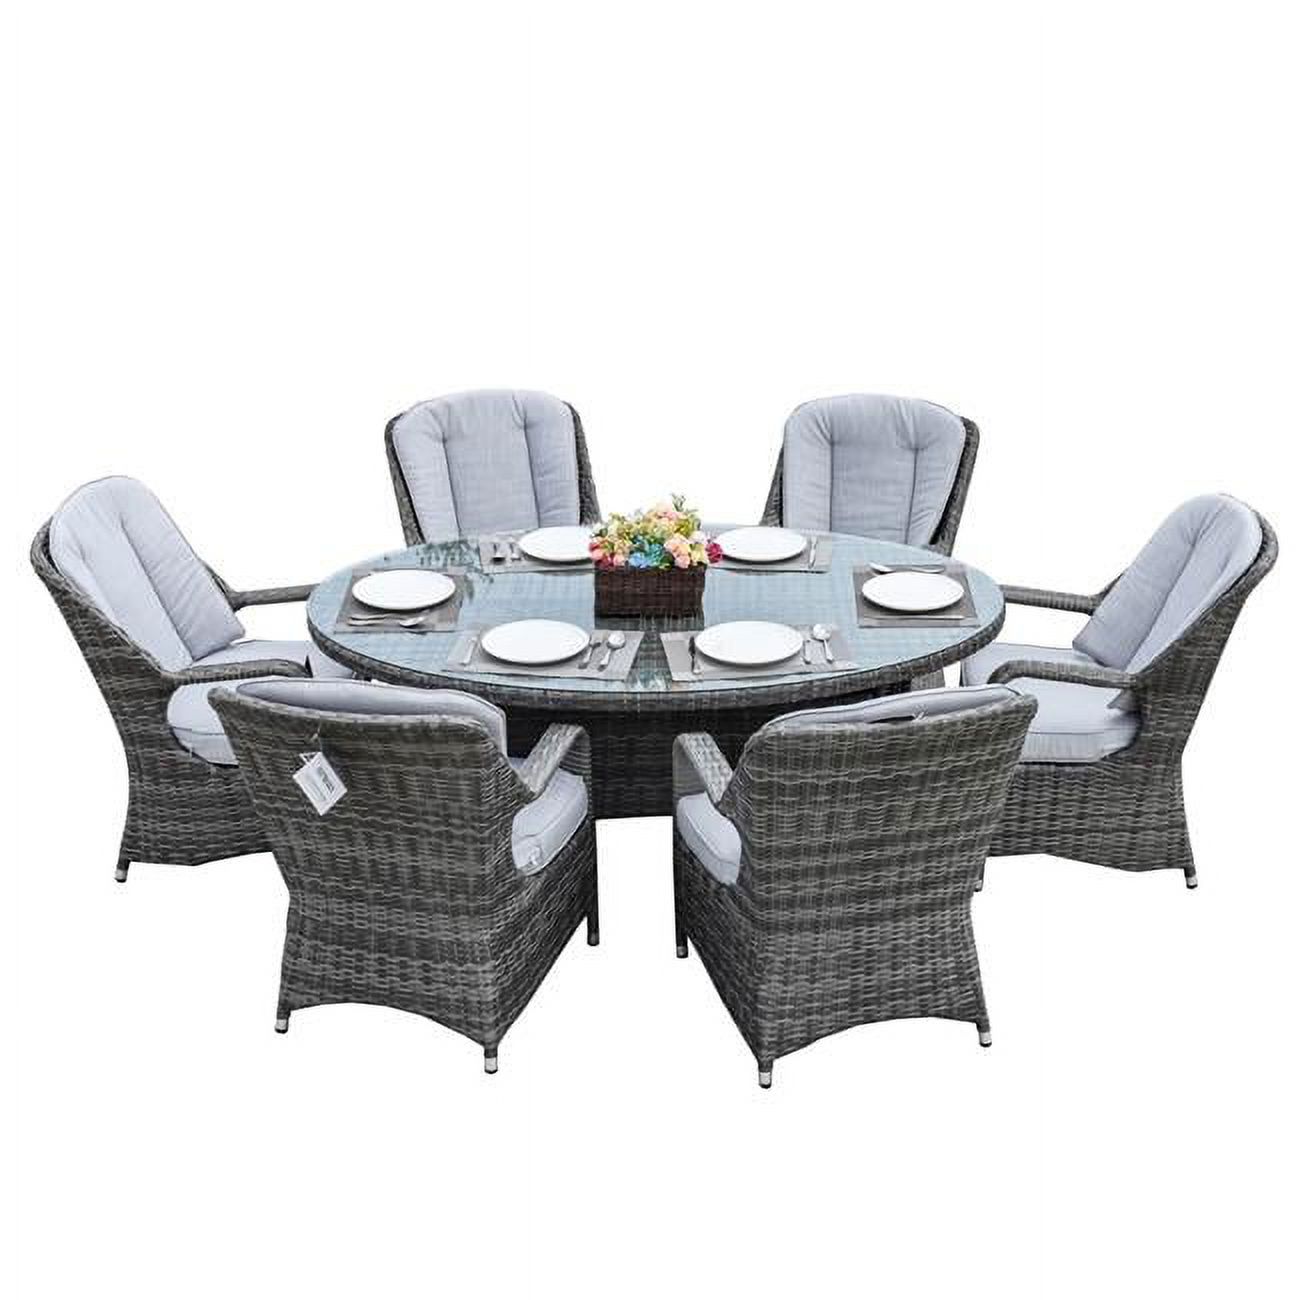 Direct Wicker  7 Piece 6 Seat Outdoor Garden Lamao Rattan Oval Dining Table and Chairs Set - image 1 of 1